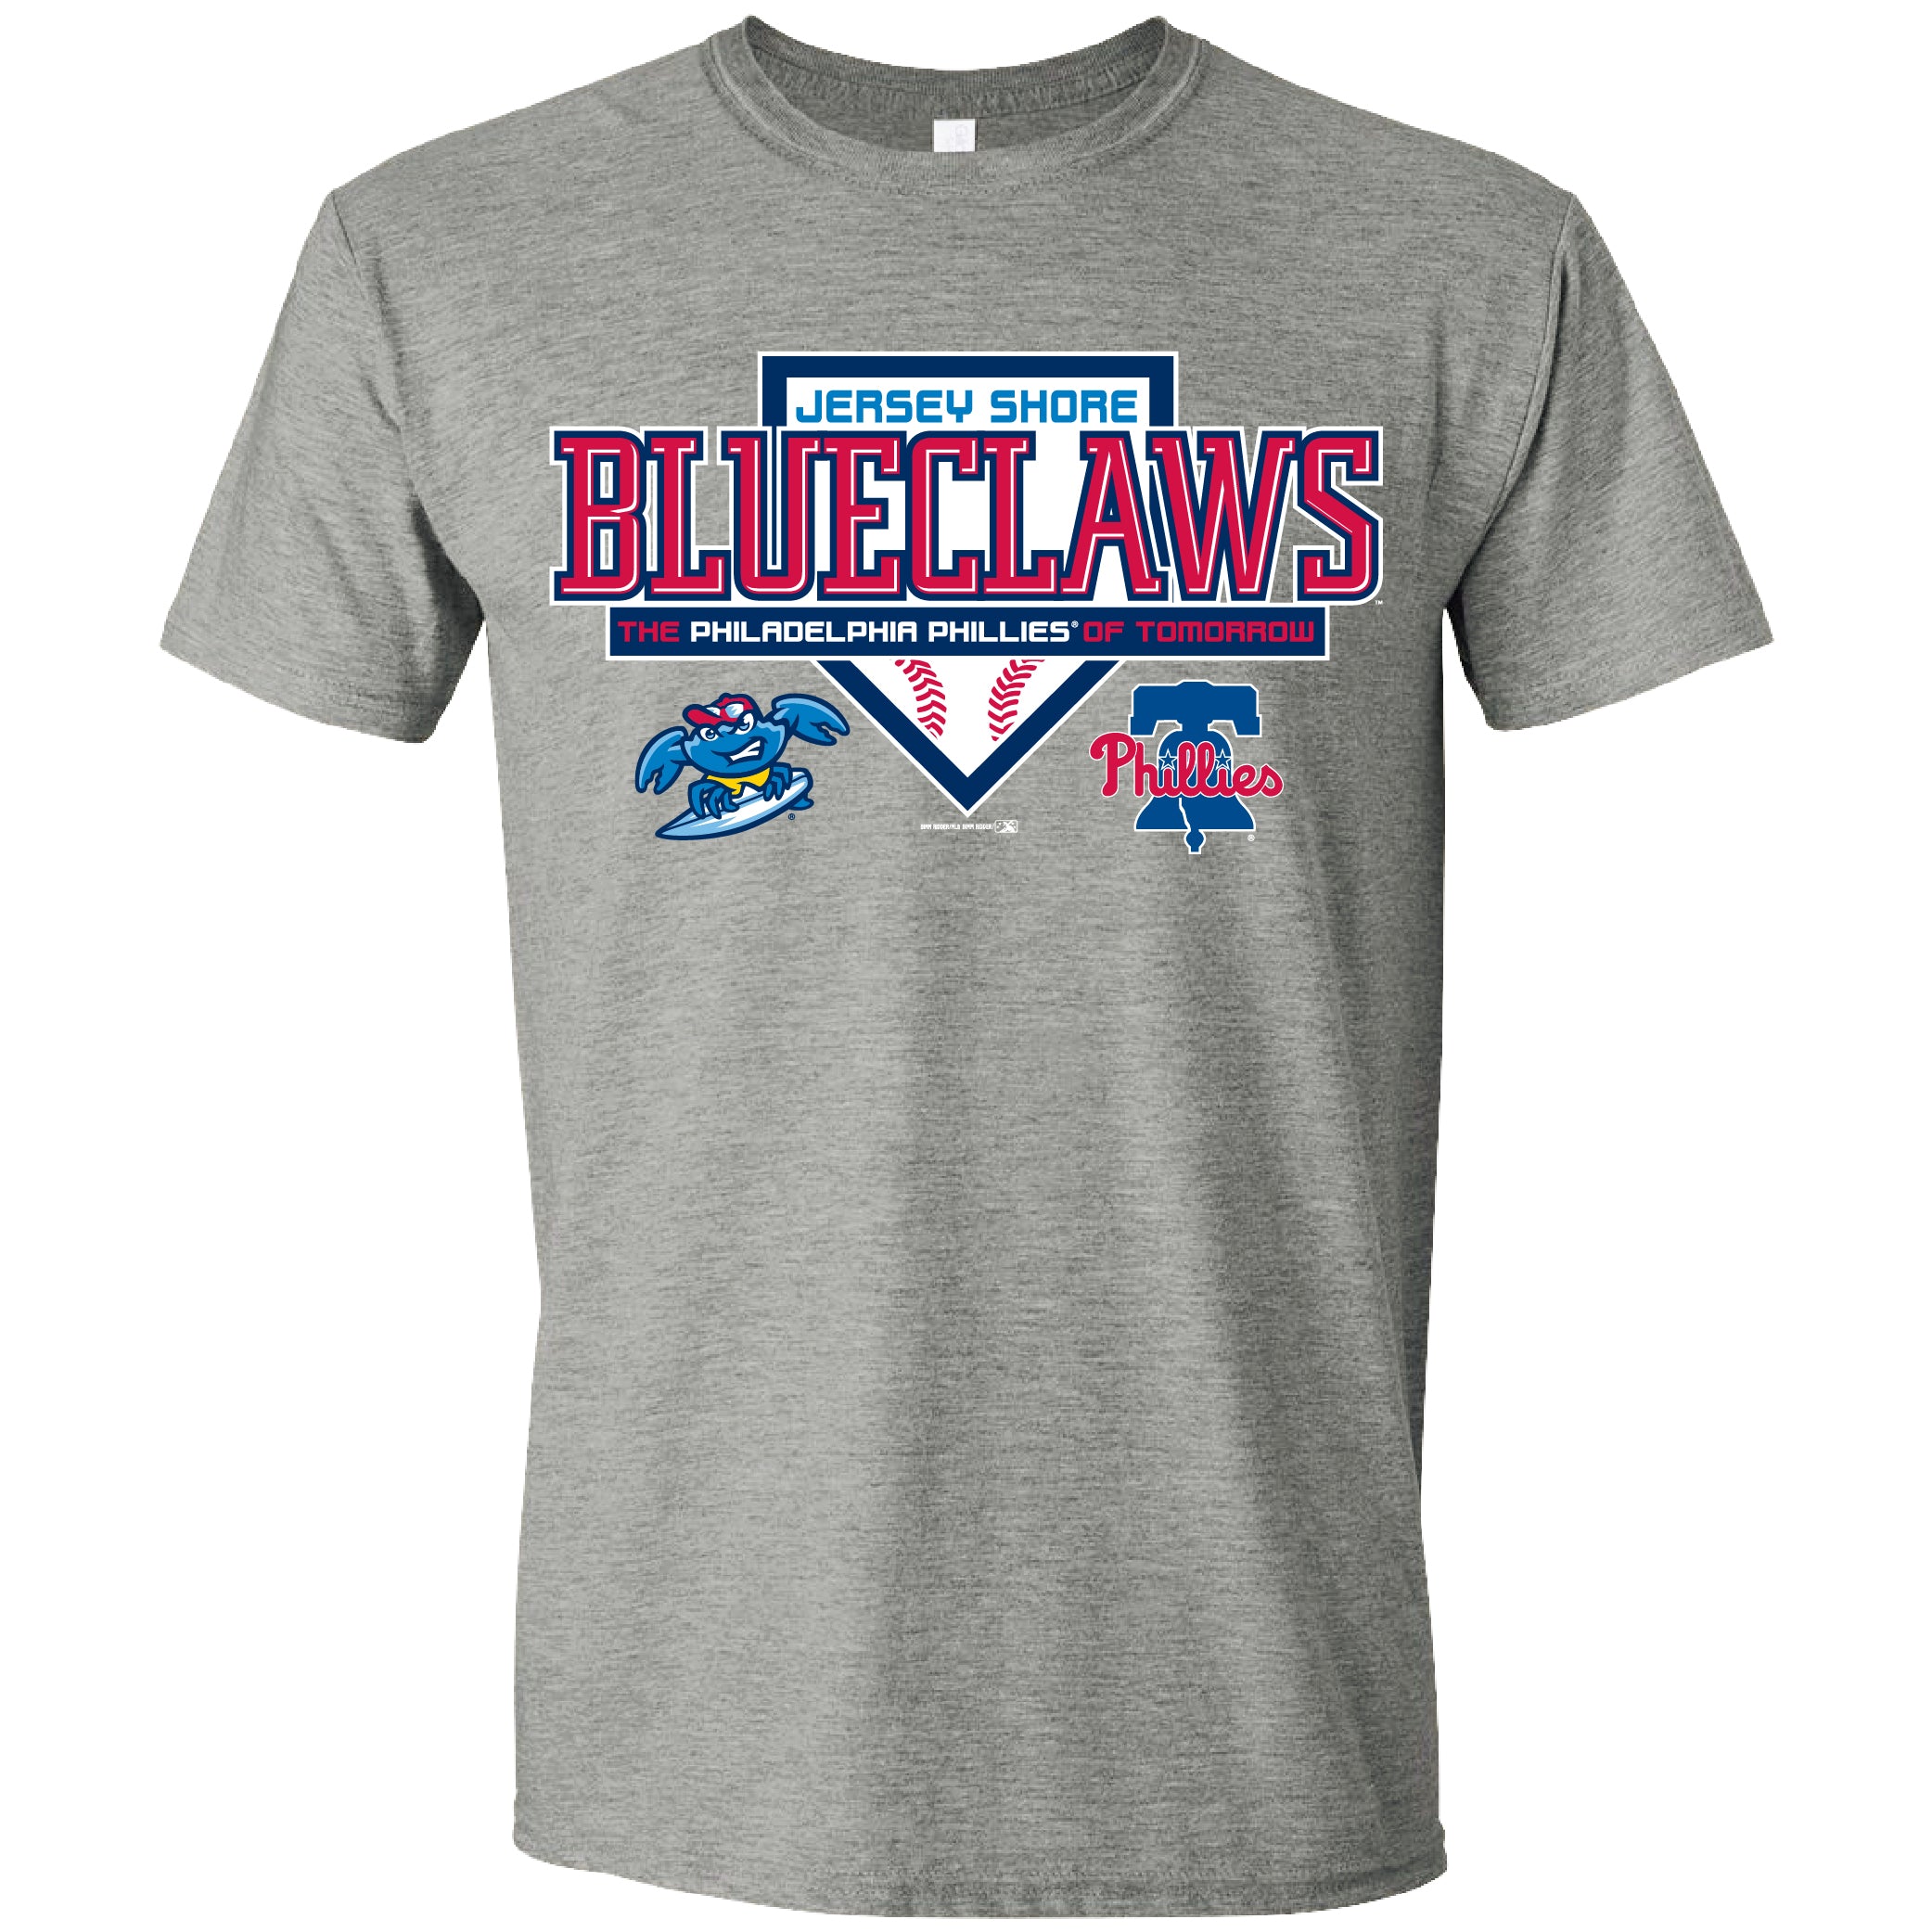 Jersey Shore BlueClaws Phillies Affiliate Tee – Jersey Shore